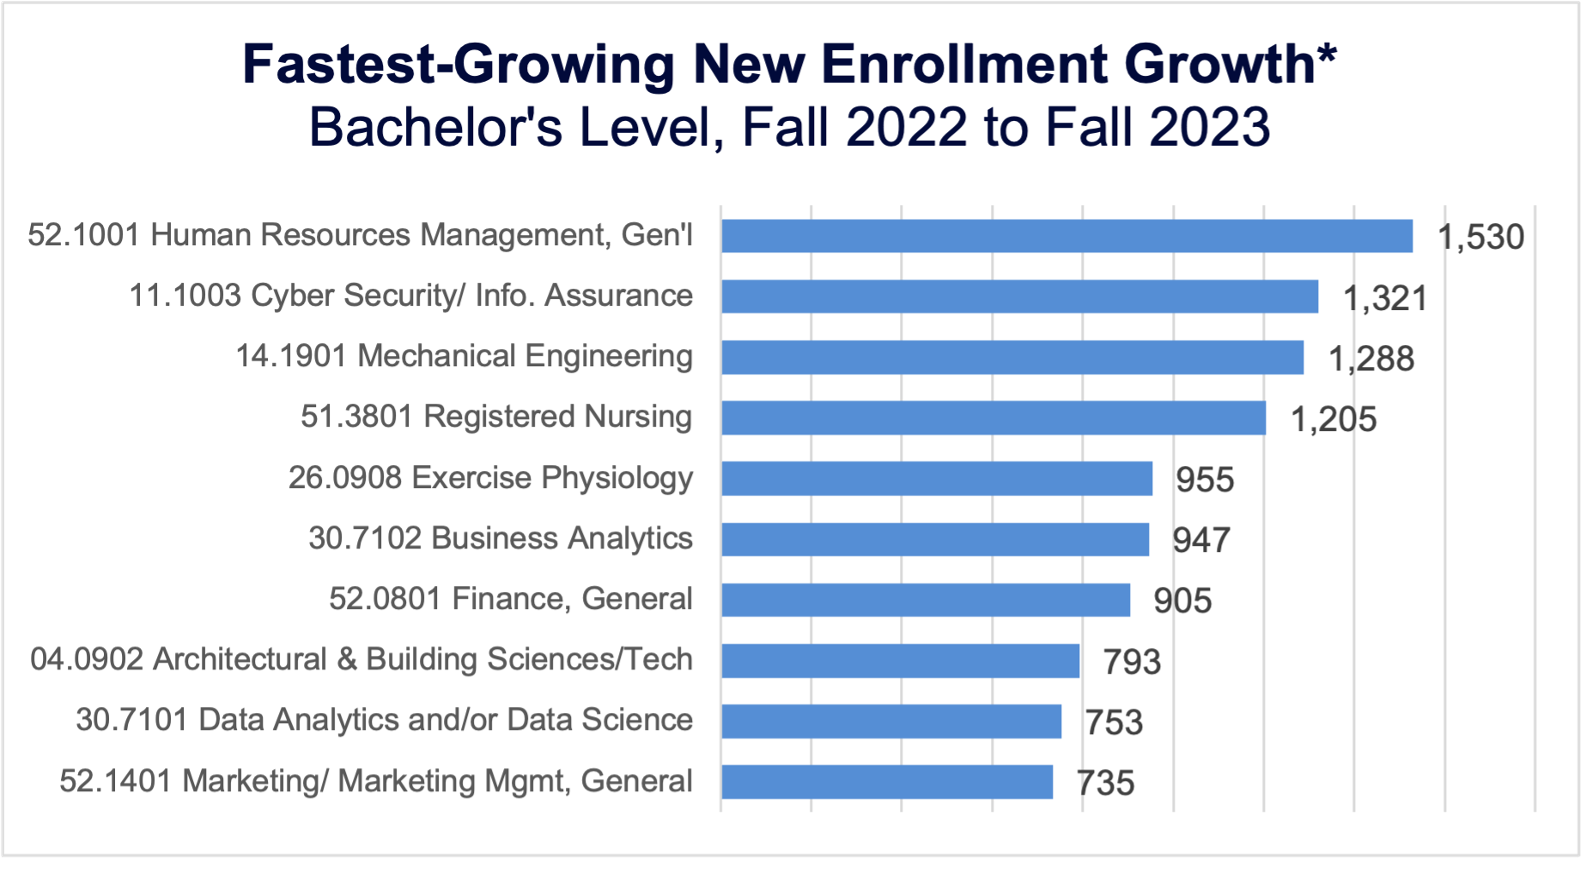 Fastest-Growing New Enrollment Growth* Bachelor's Level, Fall 2022 to Fall 2023